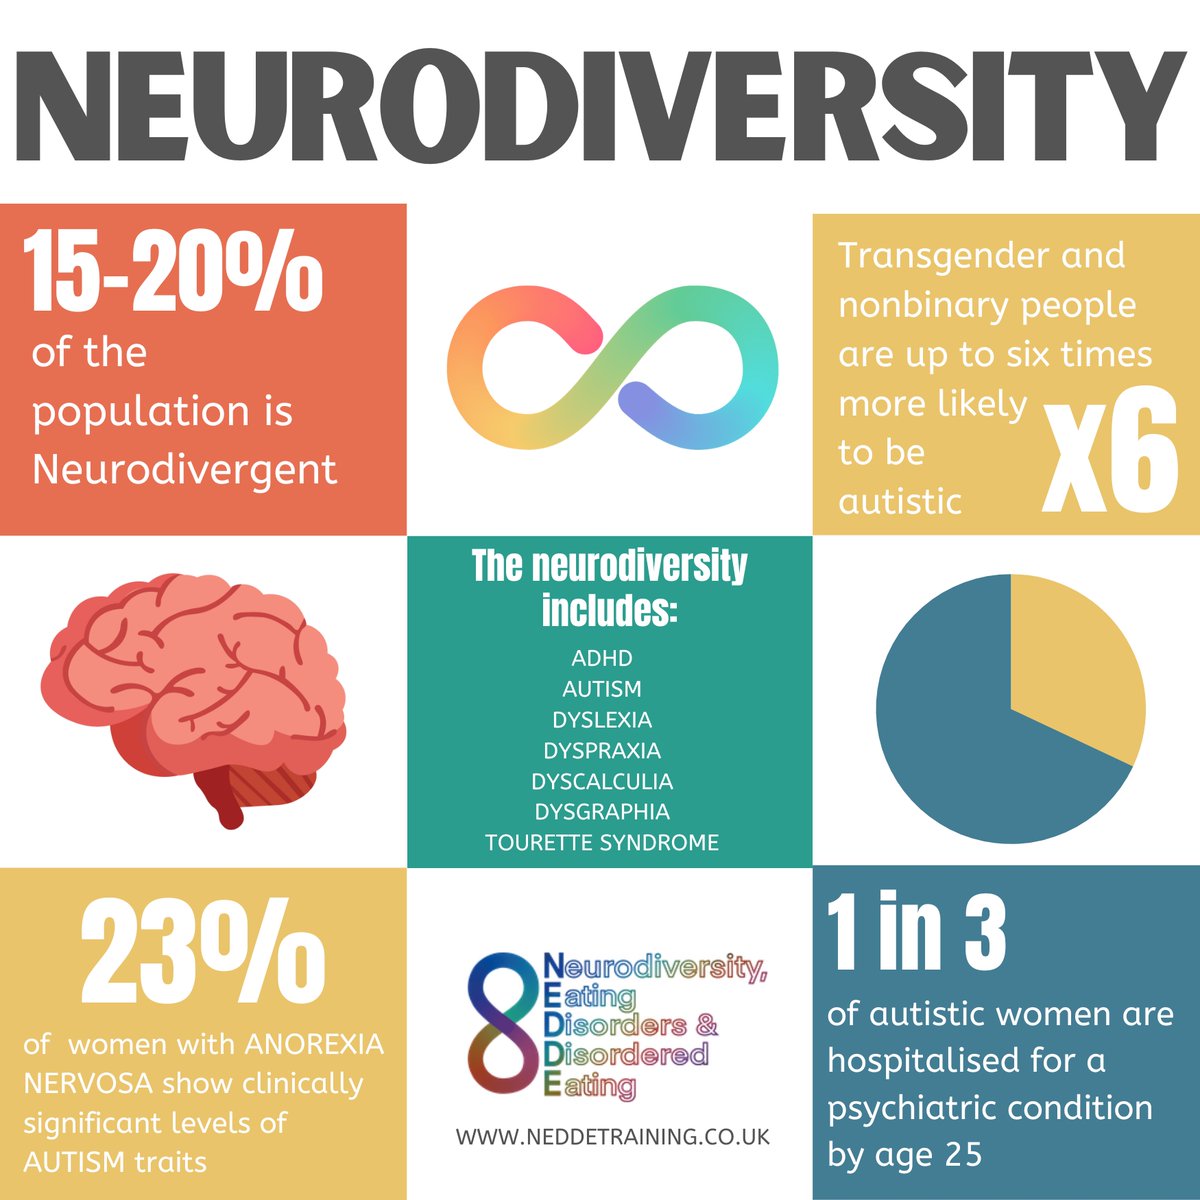 Did you know? 1 in 5 of us are Neurodivergent. Discover how this intersects with eating disorders in our upcoming Diploma in Eating Disorders, Disordered Eating and Neurodiversity.  

#NeurodiversityFacts #NeurodivergentAwareness #EatingDisorderEducation #NeurodiversityAndHealth